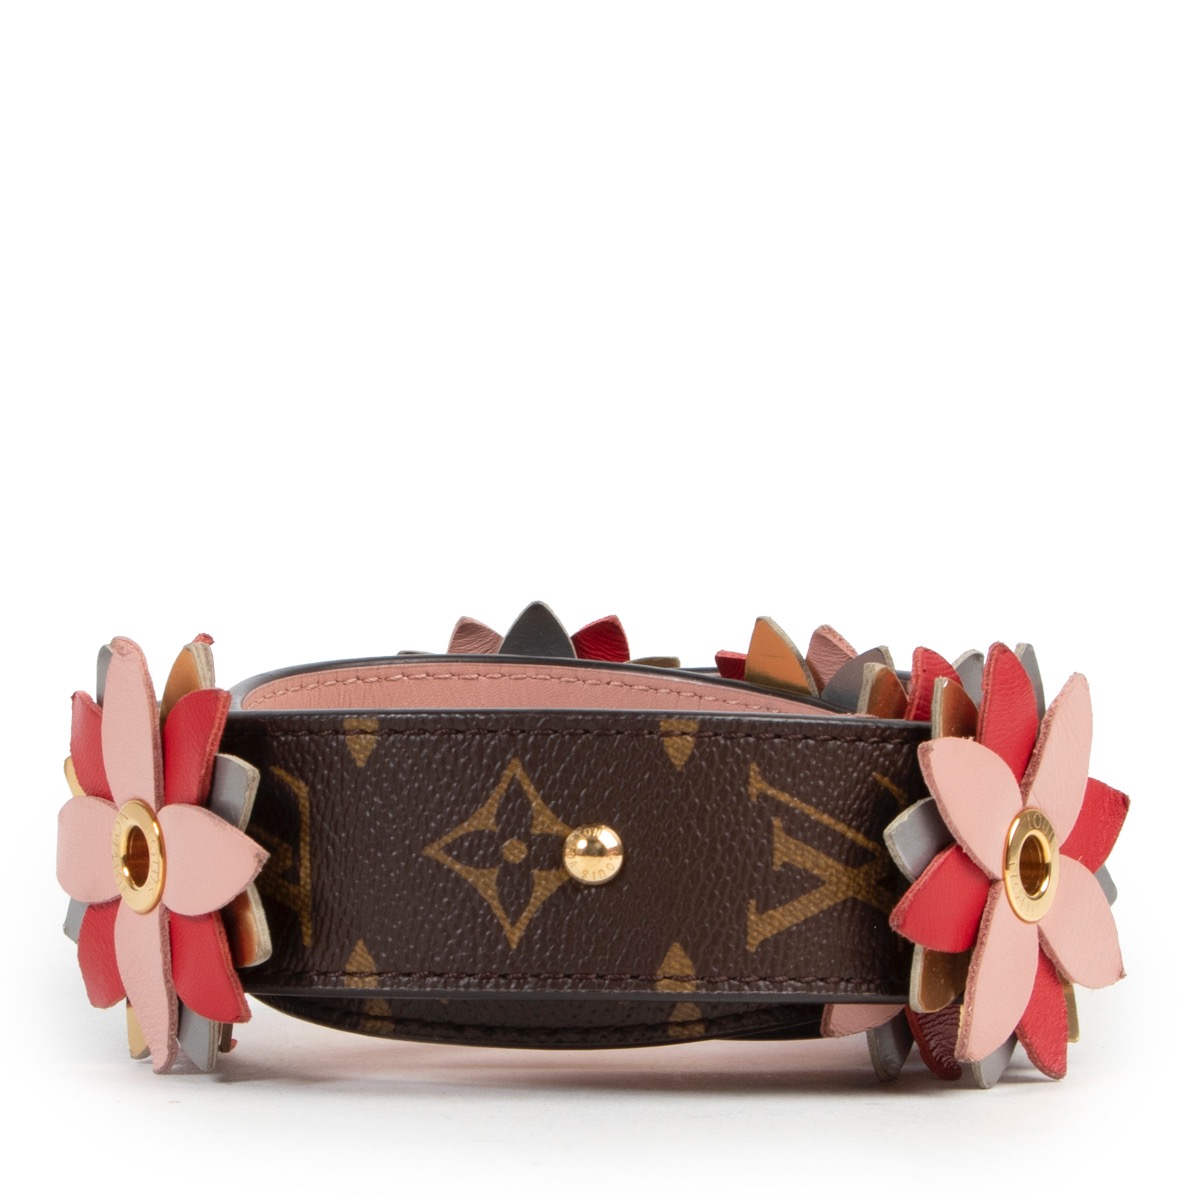 Louis Vuitton Bag Strap - 1,529 For Sale on 1stDibs  lv bag strap, louis  vuitton pink strap bag, lv strap bag